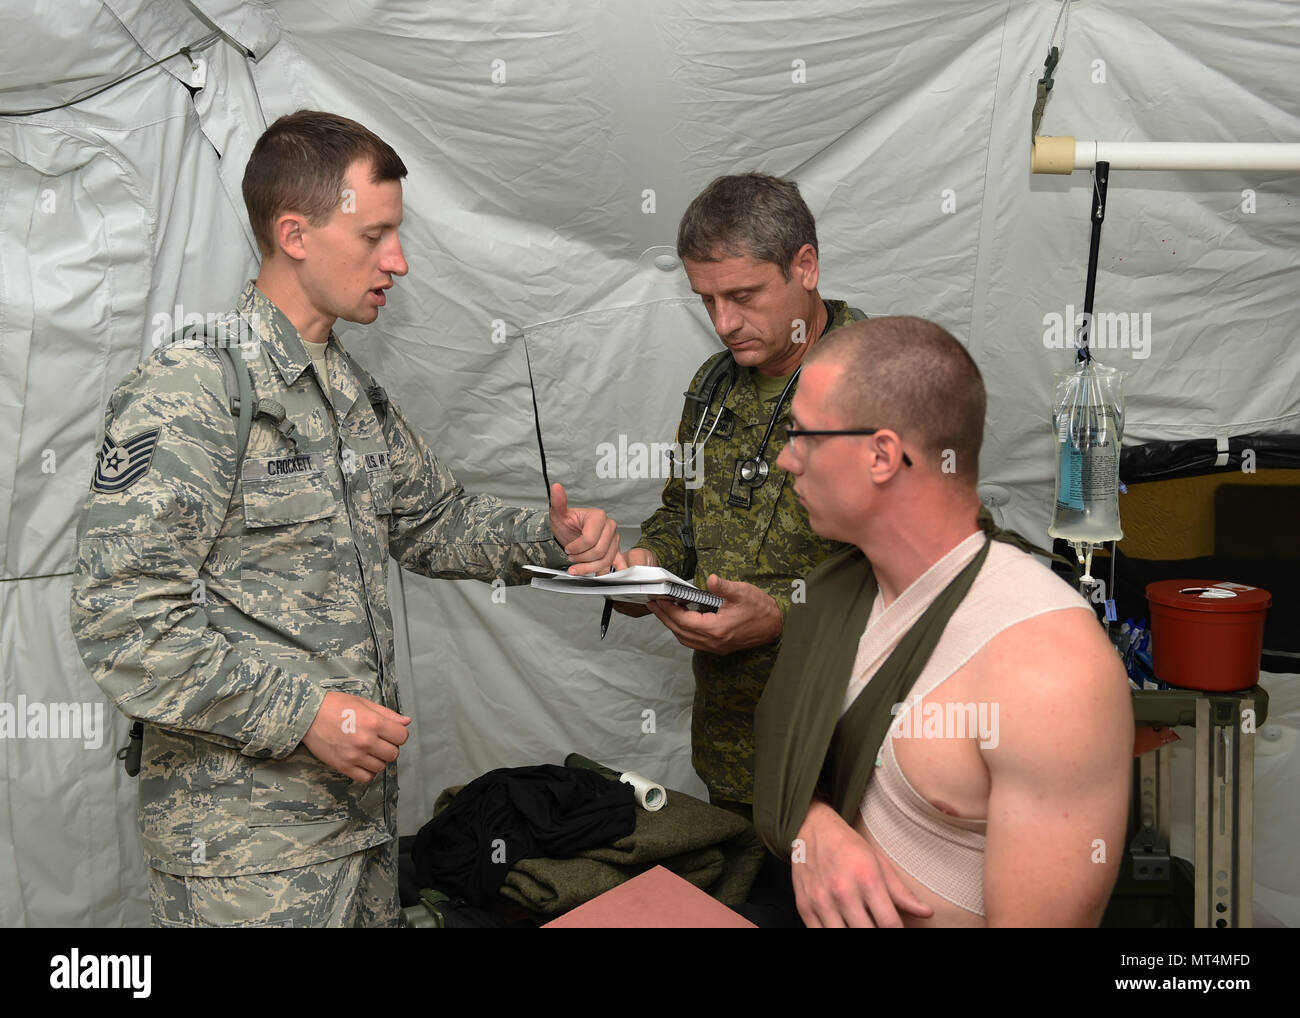 https://c8.alamy.com/comp/MT4MFD/tech-sgt-davy-crockett-132d-medical-group-nursing-ncoic-reviews-patient-notes-with-maj-enver-bequiri-a-doctor-in-the-kosovo-security-force-july-24-2017-at-camp-dodge-in-johnston-iowa-soldiers-and-airmen-trained-together-with-medics-from-kosovo-iowas-state-partner-as-well-as-the-united-kingdom-us-air-national-guard-photo-by-staff-sgt-michael-j-kelly-MT4MFD.jpg